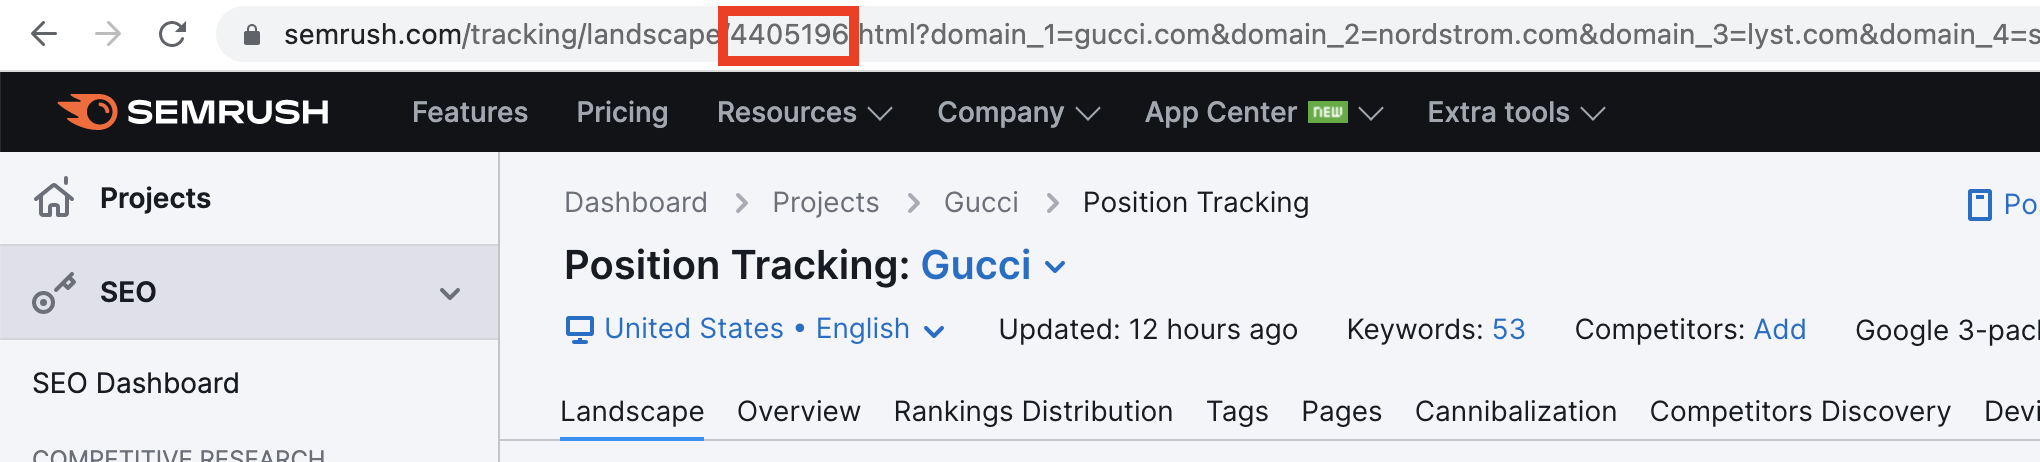 The top of the Position Tracking tool inside the Semrush platform. A red rectangle highlights the campaign ID (4405196) in the URL of the page.  